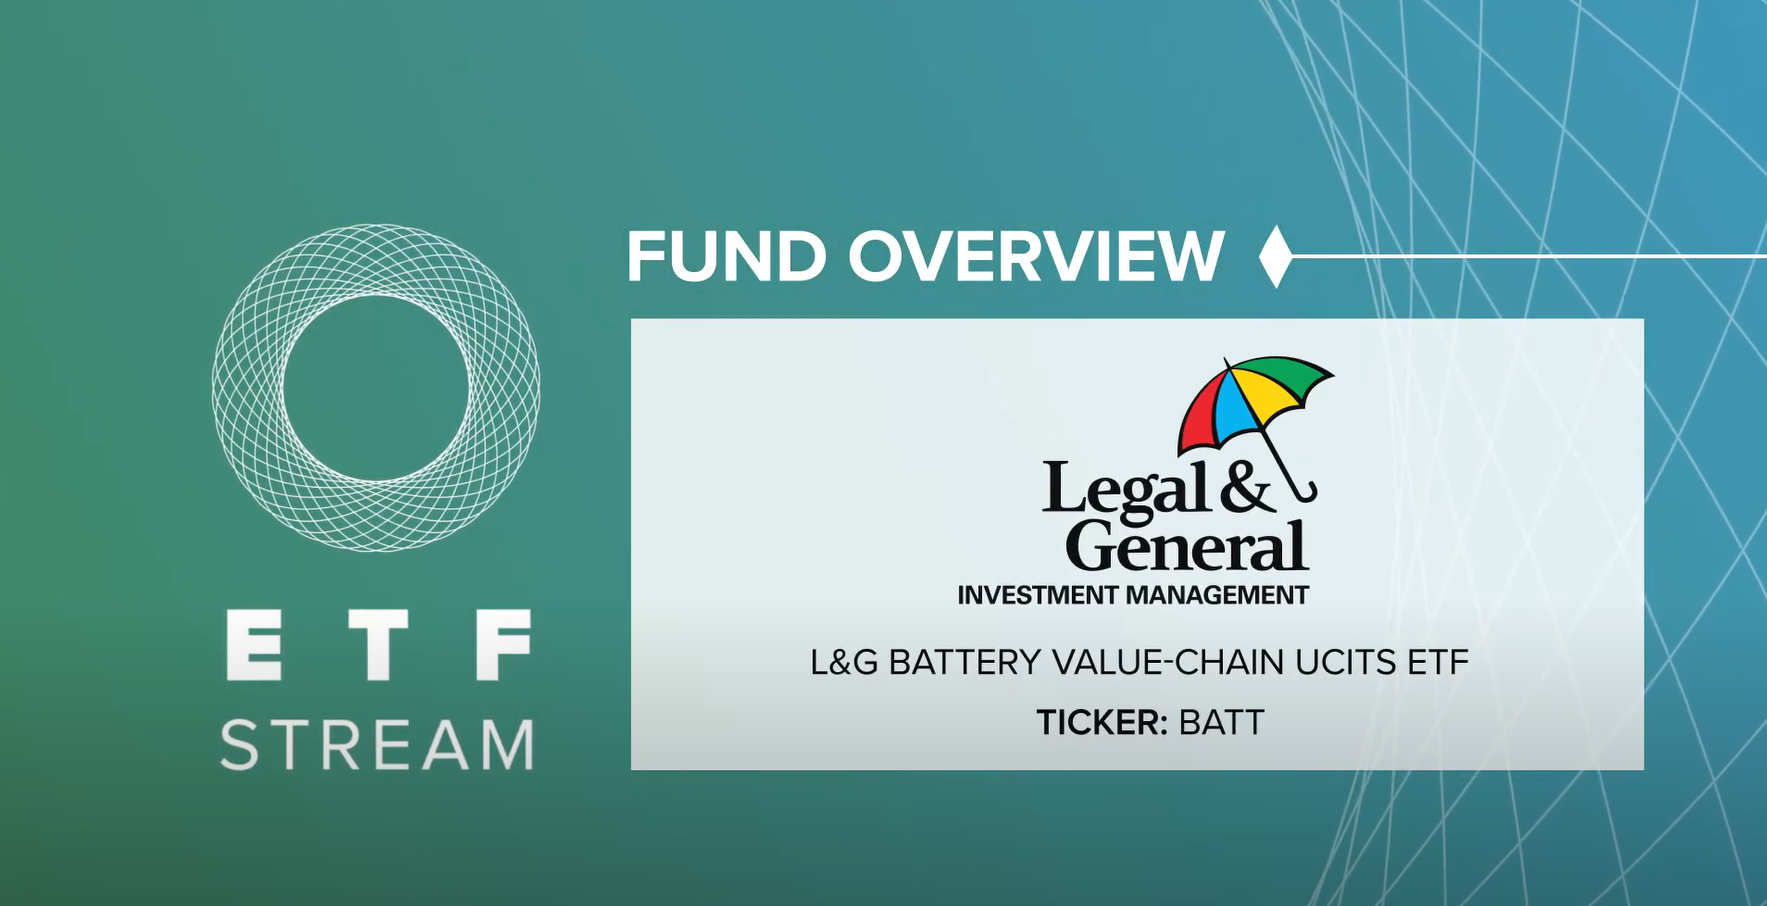 Fund Overview BATT Legal & General Battery Value-Chain UCITS ETF